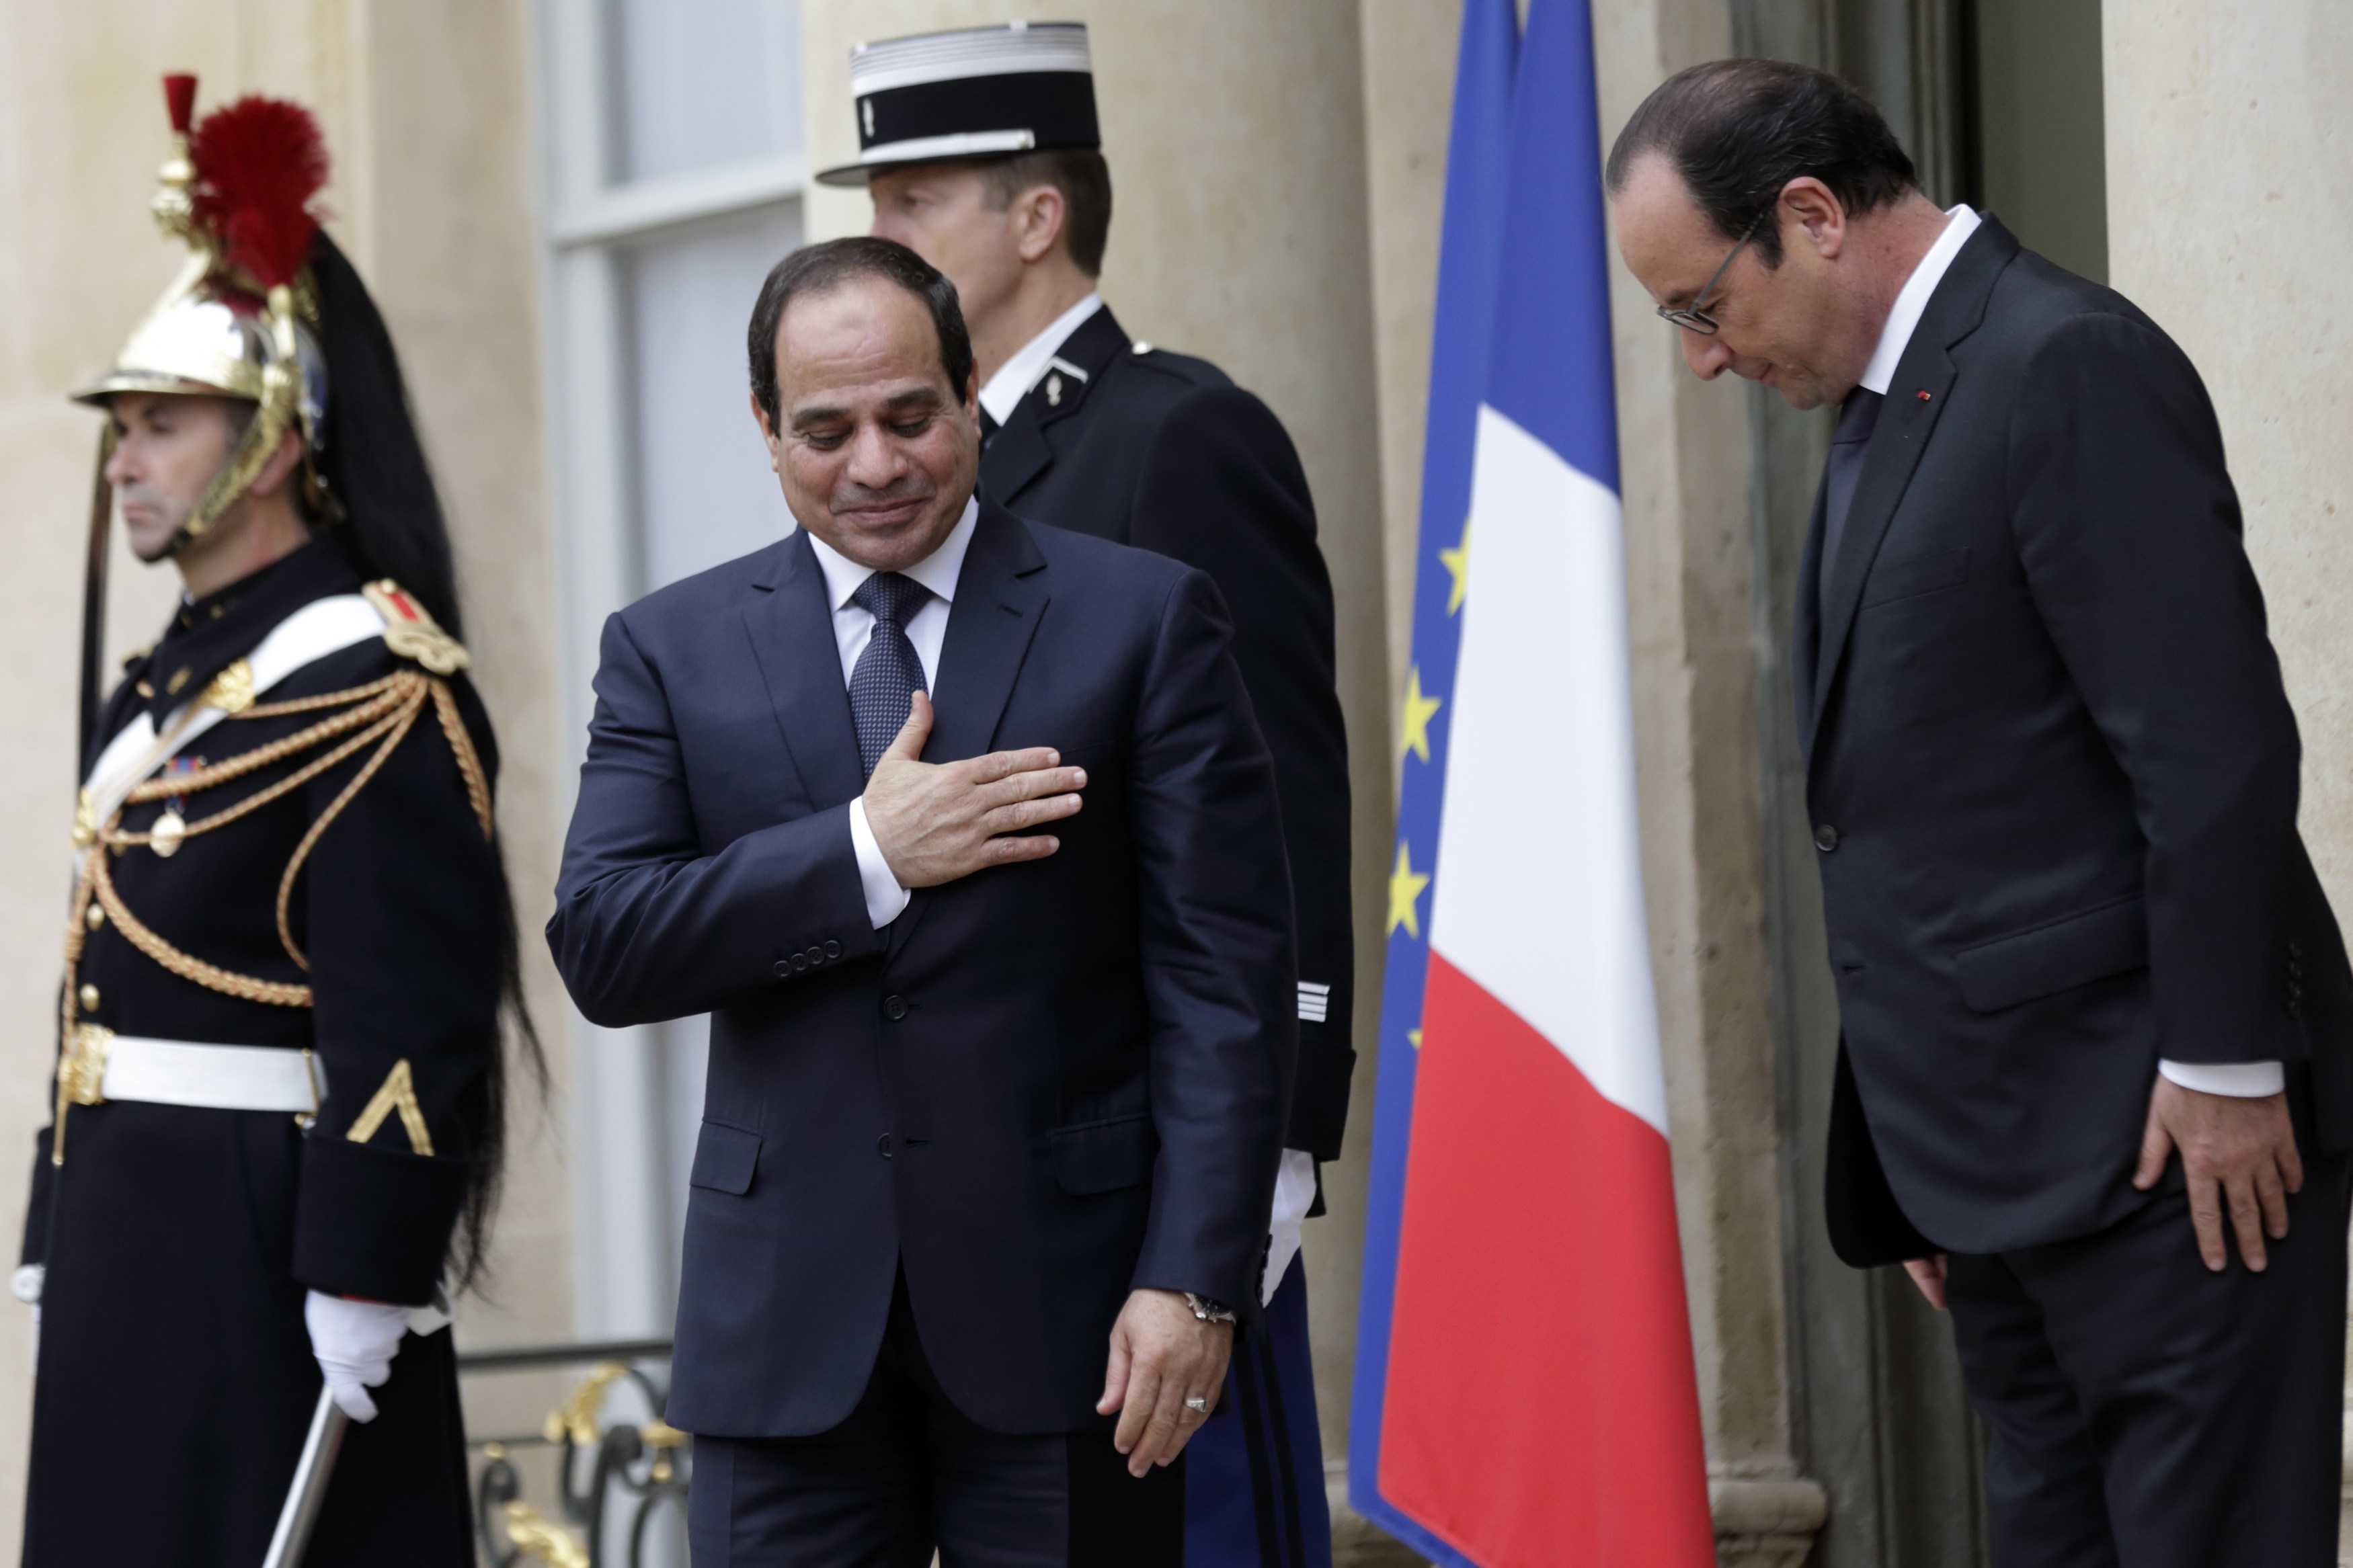 Sisi will receive French PM to sign cooperation deals